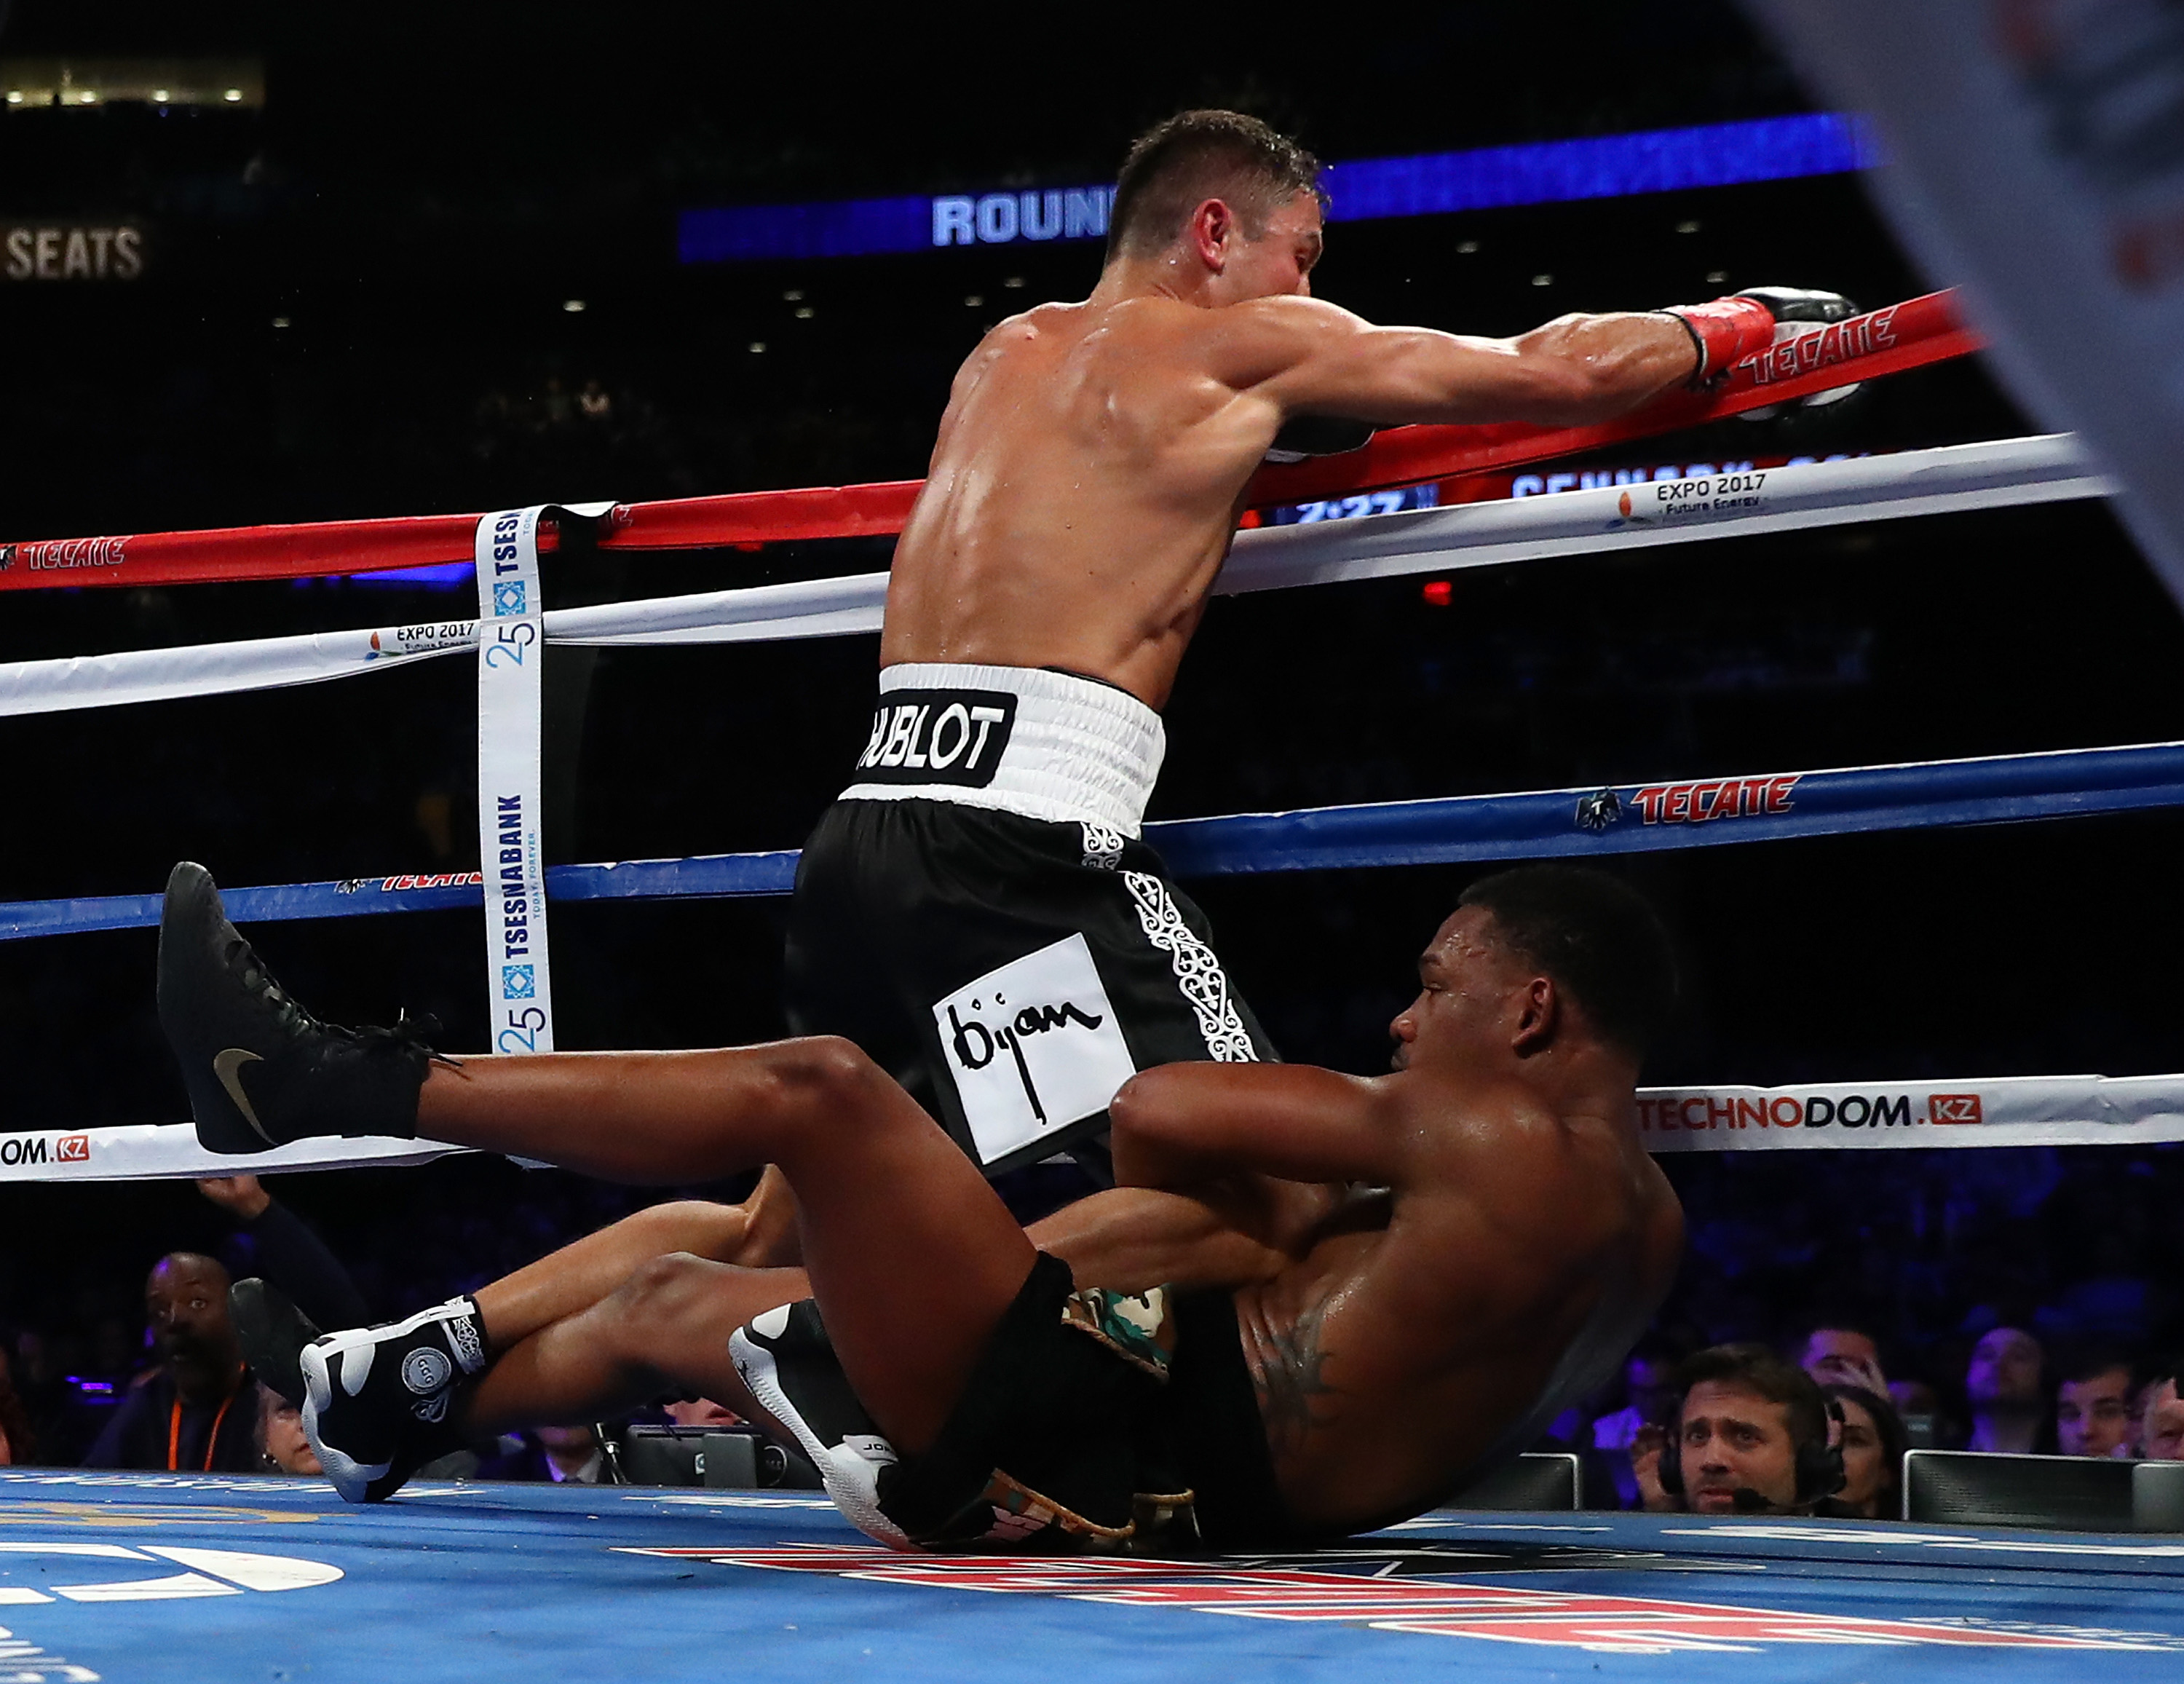 NEW YORK, NY - MARCH 18: Gennady Golovkin knocks down Daniel Jacobs in the fourth round during their Championship fight for Golovkin's WBA/WBC/IBF middleweight title at Madison Square Garden on March 18, 2017 in New York City. (Photo by Al Bello/Getty Images)